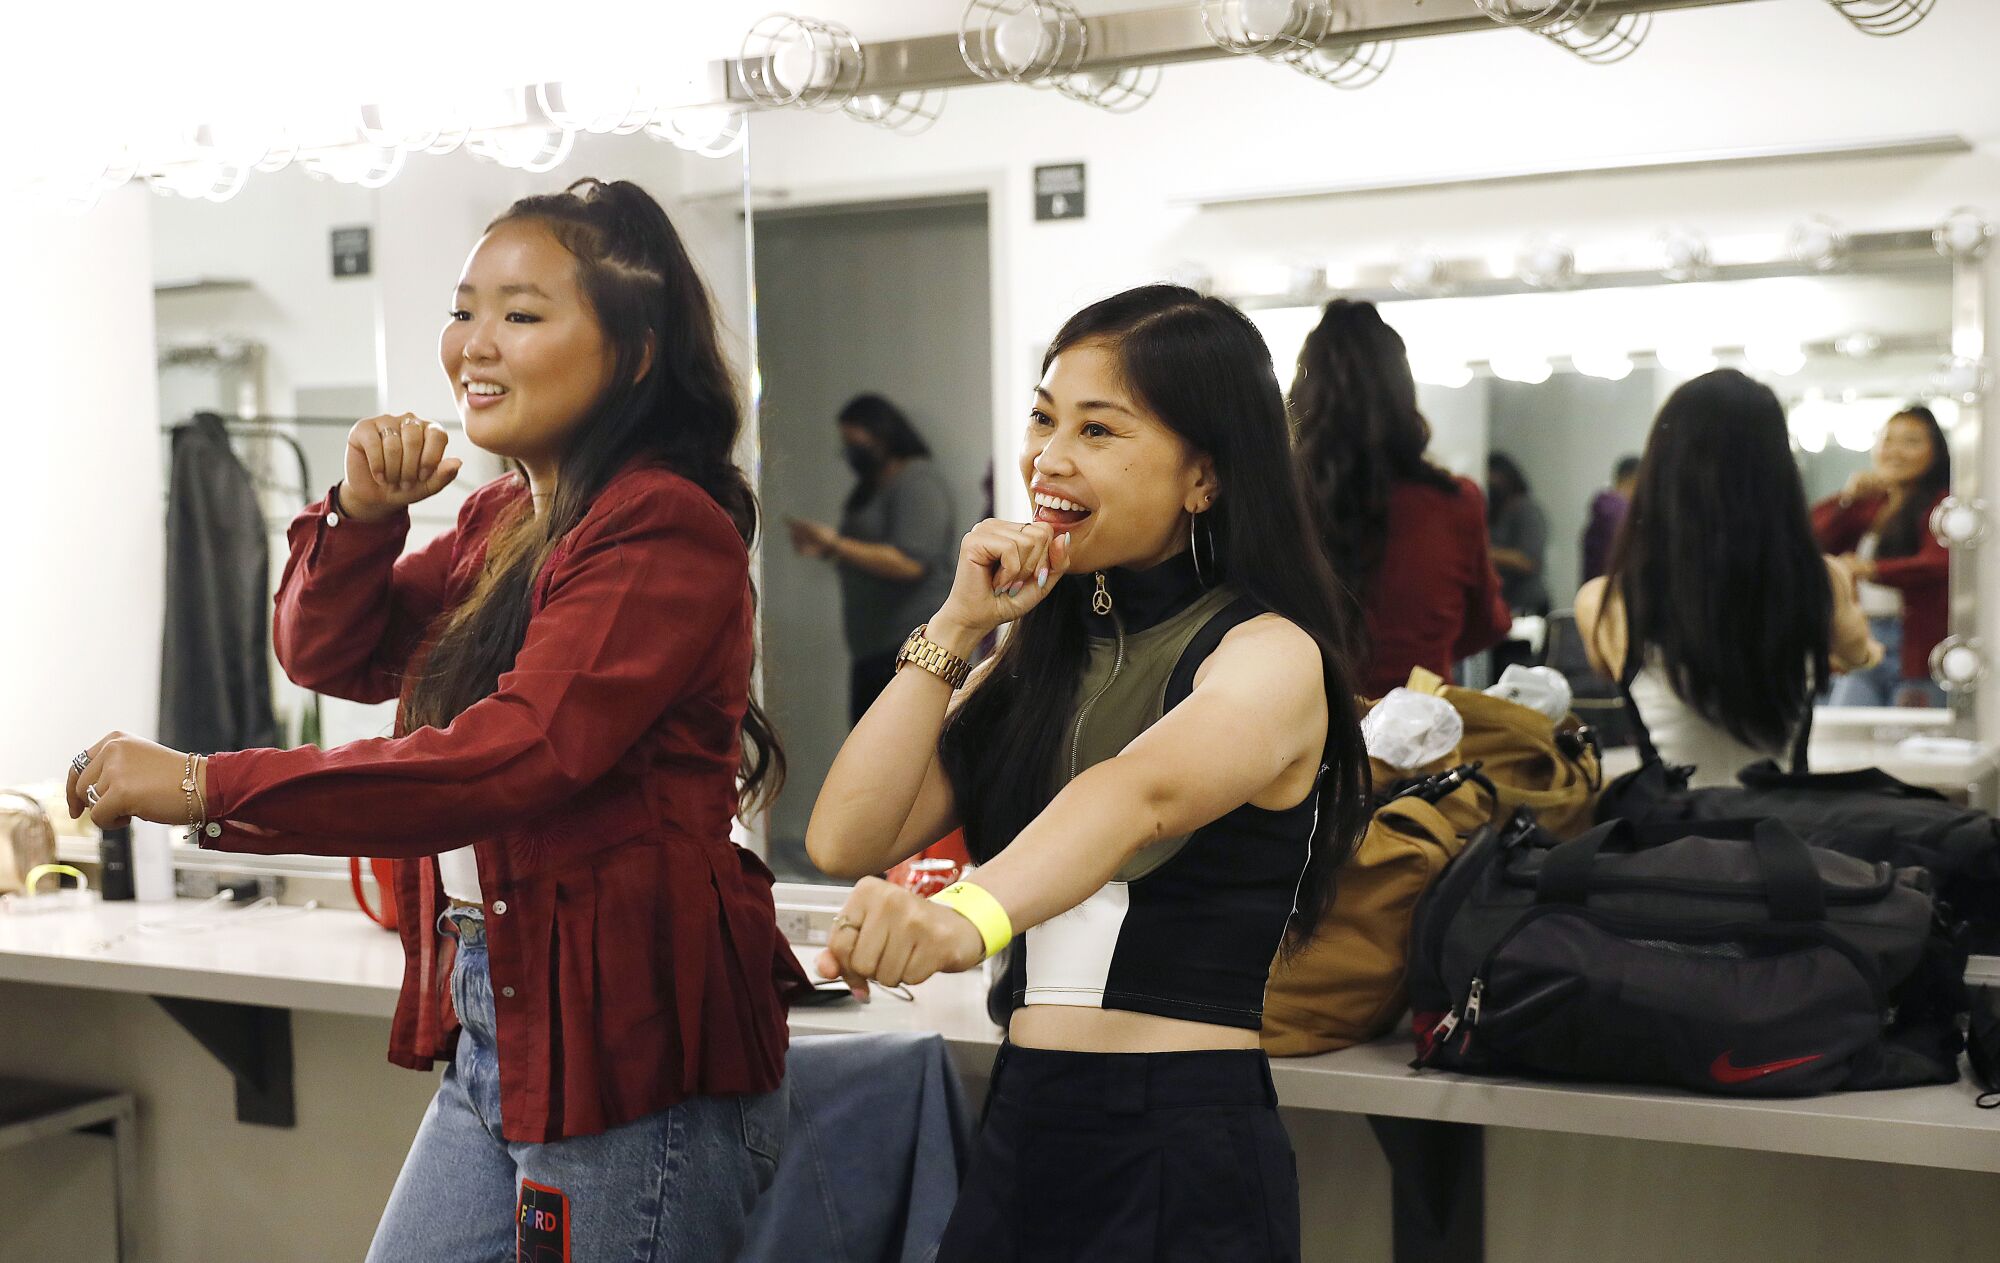 Ella Jay Basco, left, and Ruby Ibarra rehearse in the dressing room.